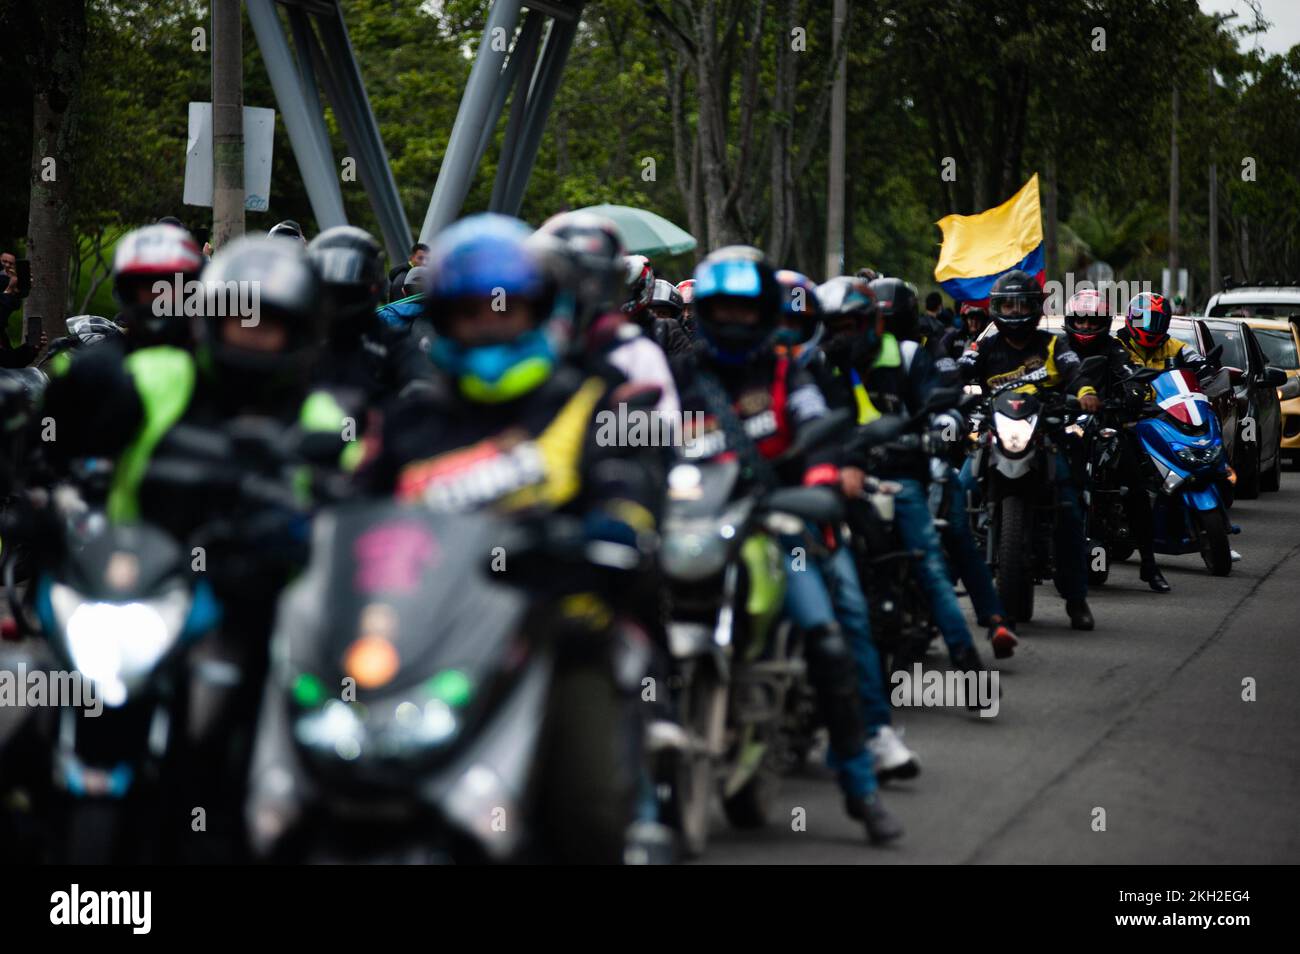 Bikers protest in Bogota, Colombia amid road security and prosecution for use of rideshare apps and road infrastrucutre, on November 23, 2022. Photo by: Chepa Beltran/Long Visual Press Stock Photo